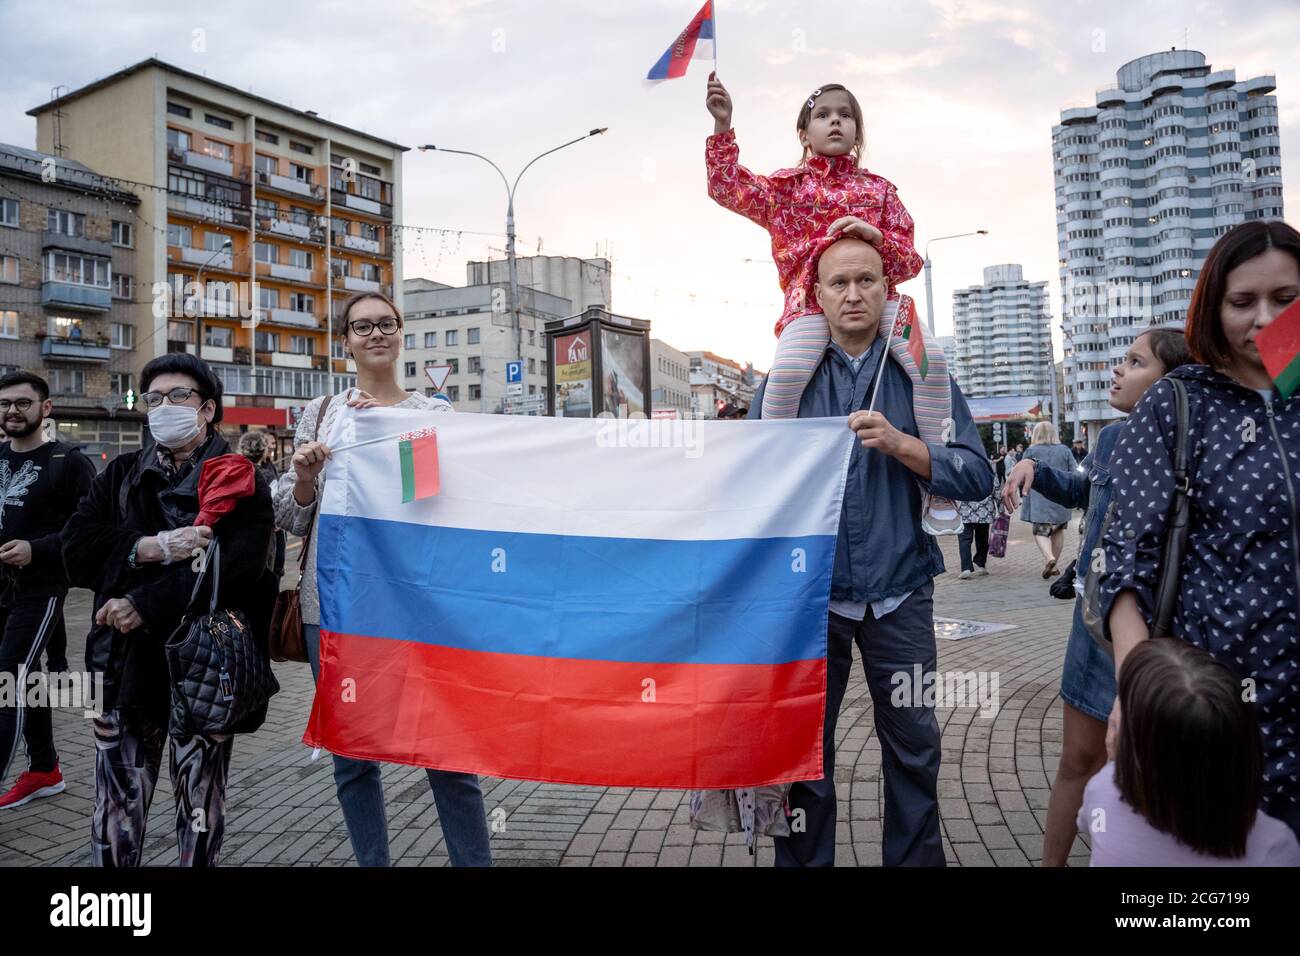 Minsk, Belarus - August 25, 2020: Belarusian people carry flag of Russia in Belarus. Rally in support of the current government Lukashenka Stock Photo